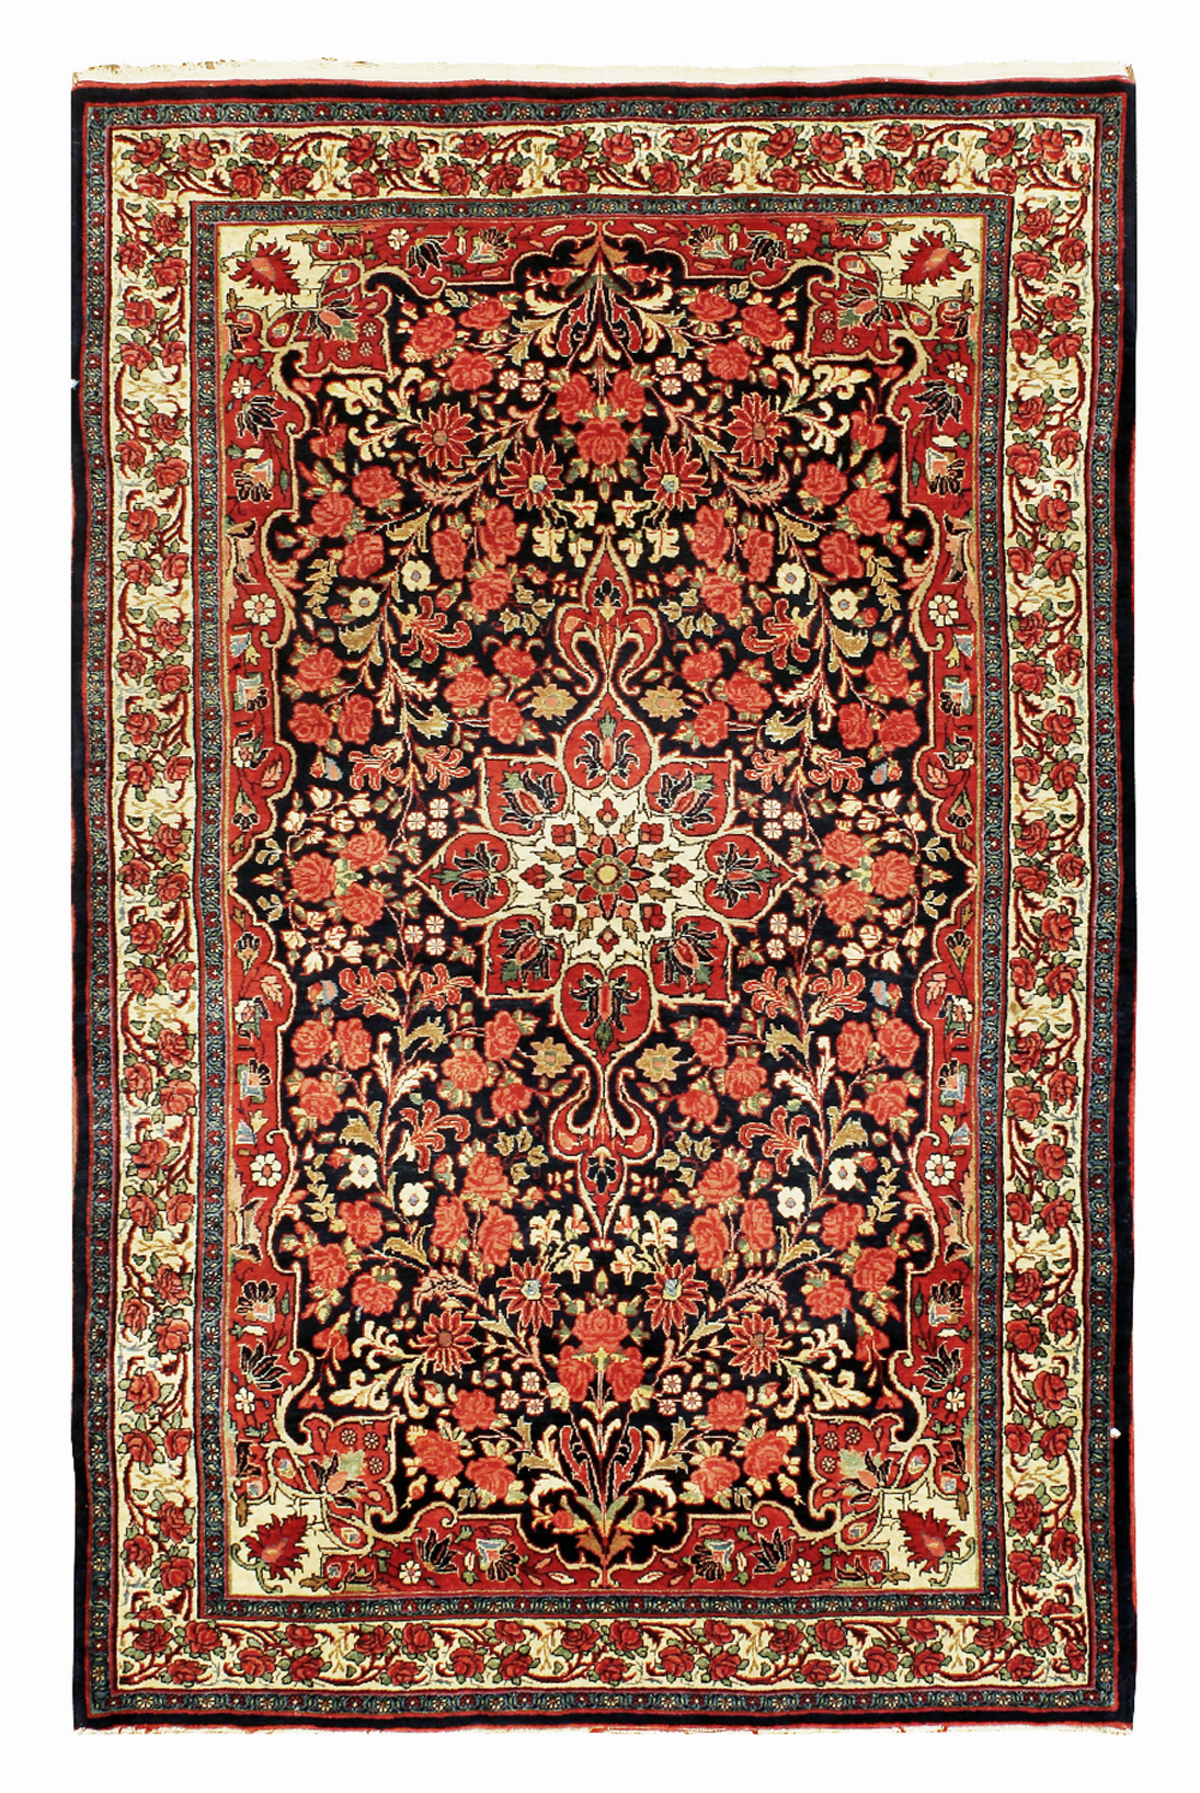 An antique Persian Bidjar rug with a central medallion on a navy blue field. The field is decorated with various flowers and leaves and framed by red scorner spandrels that extend vertically up the sides of the field to connect. An ivory border with a scrolling vine and roses frames the field. Douglas Stock Gallery, antique Oriental rugs Boston, Brookline, Newton, Wellesley, Weston, Natick , MA area New England